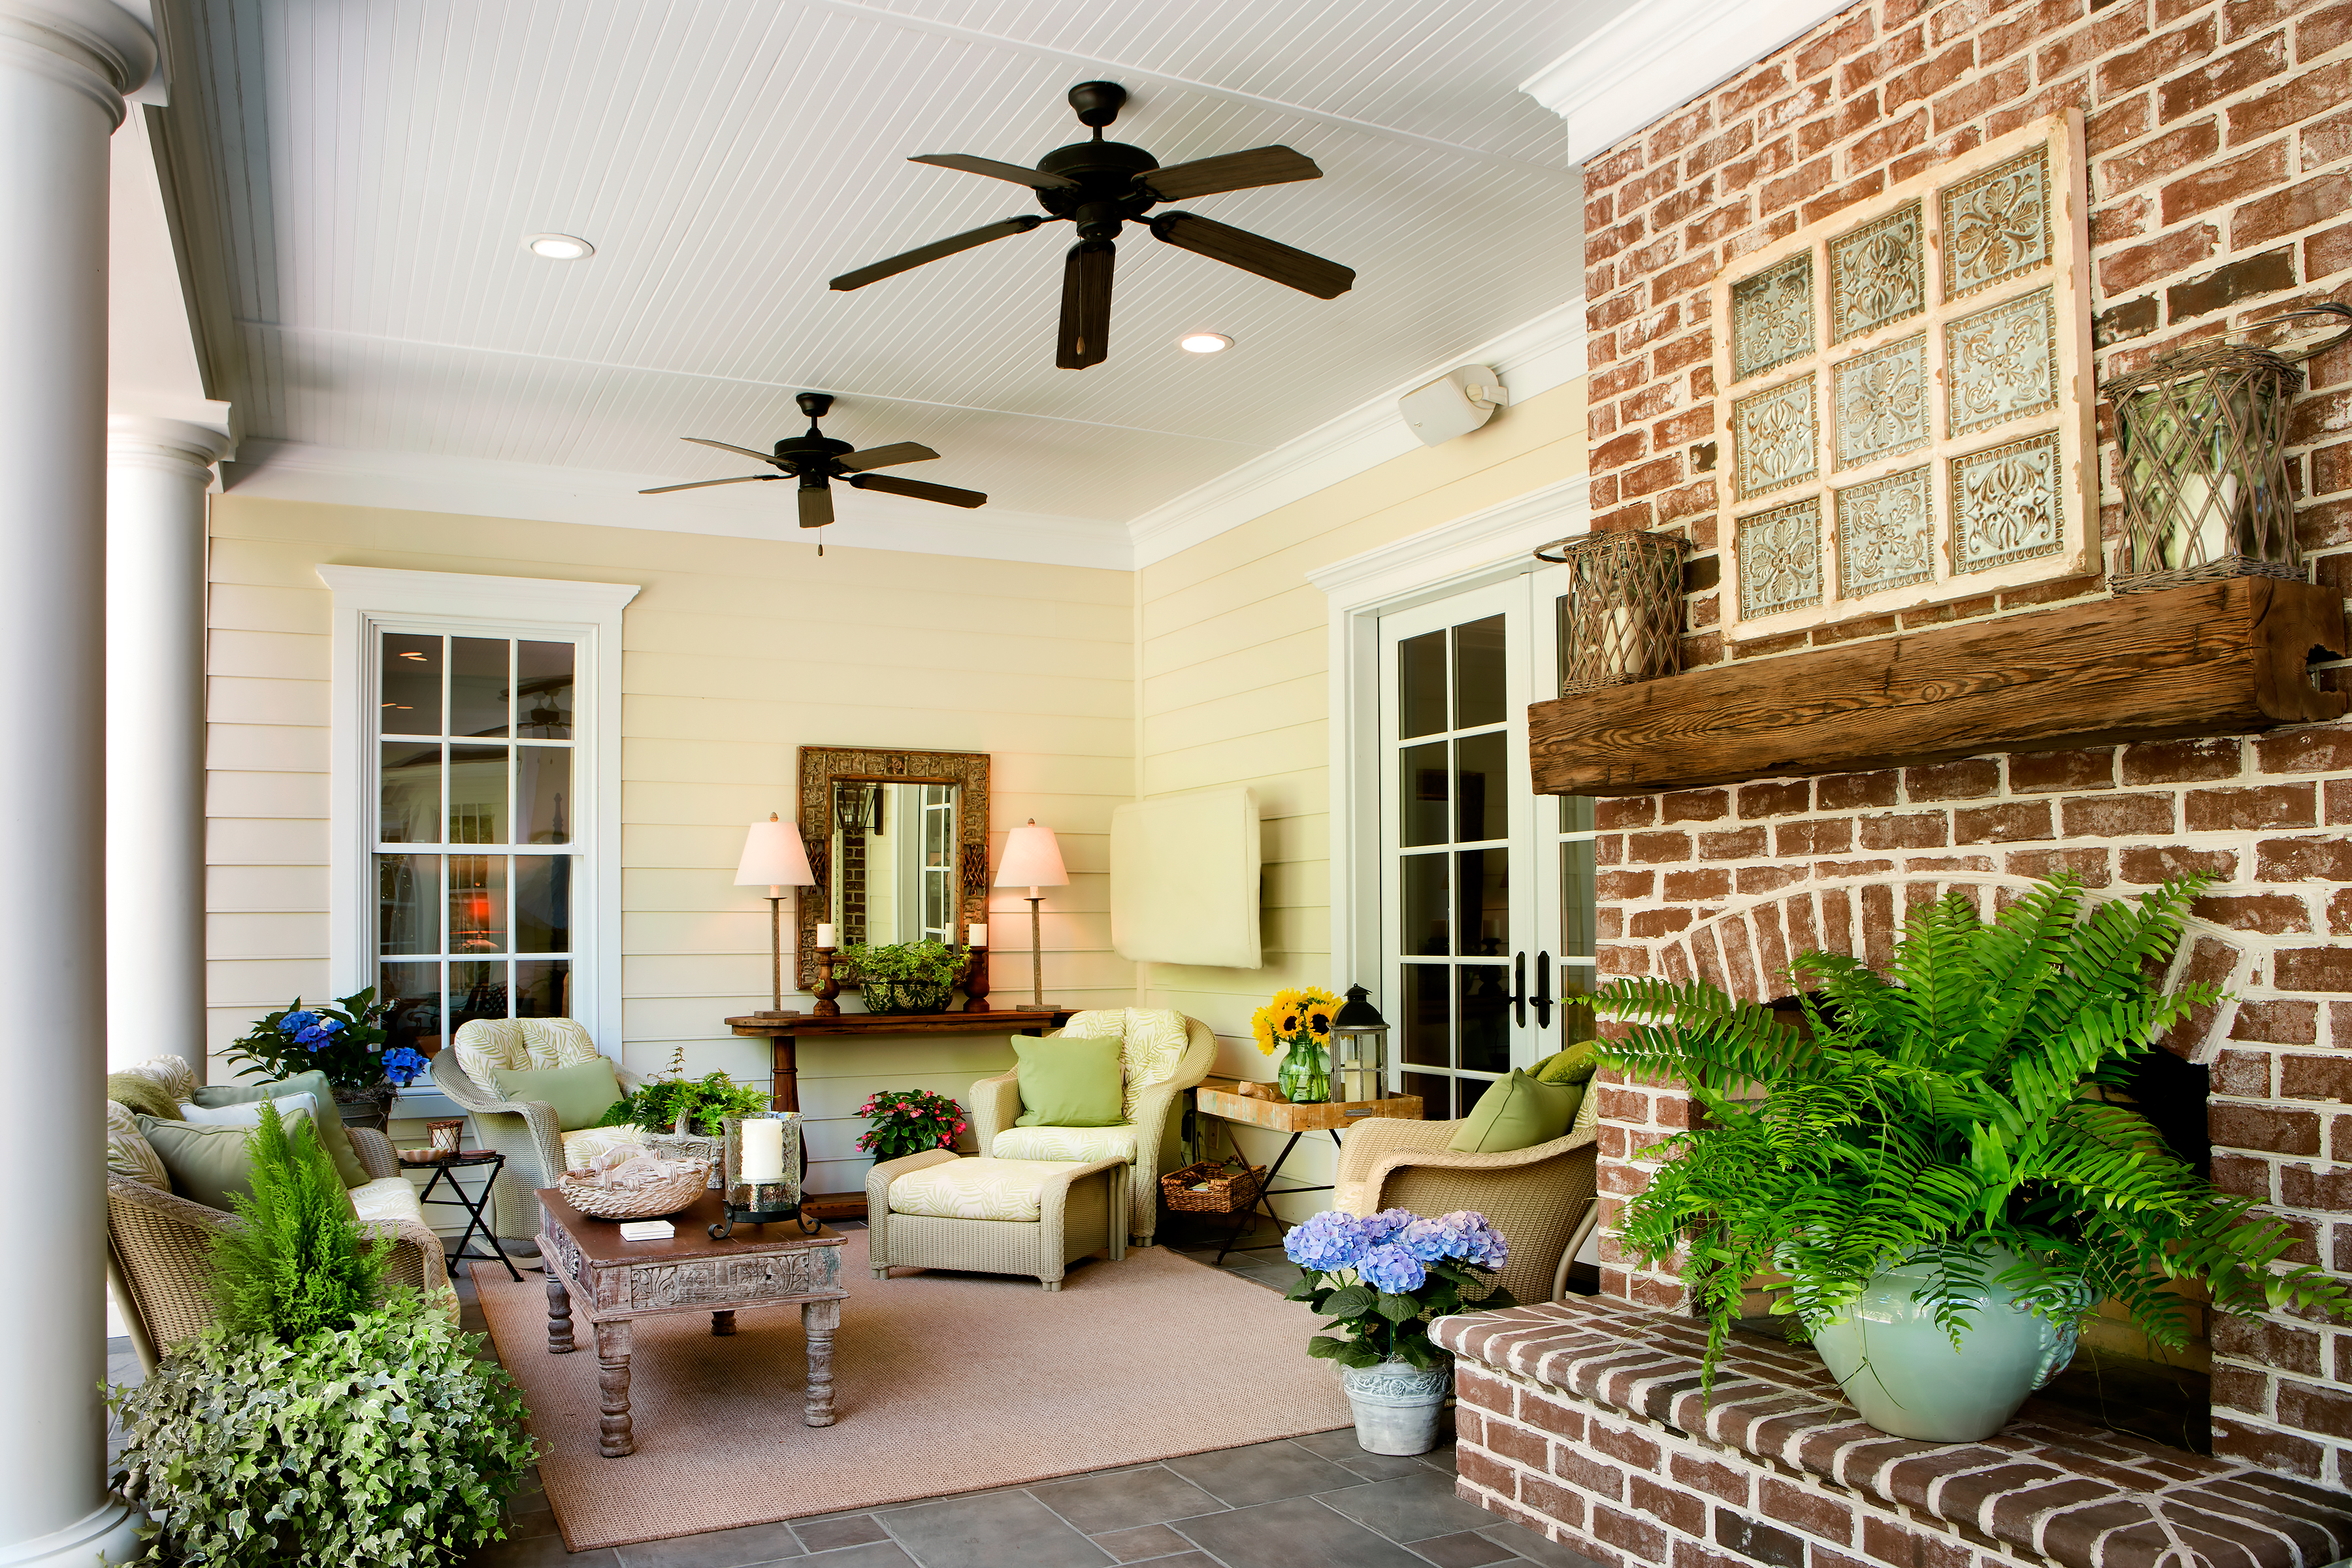 Kathy and Chuck’s porch is a tranquil spot as well as a place for entertaining friends and family. Wicker seating and ceiling fans along with ivy, ferns, and geraniums give the seating area relaxed Southern charm.